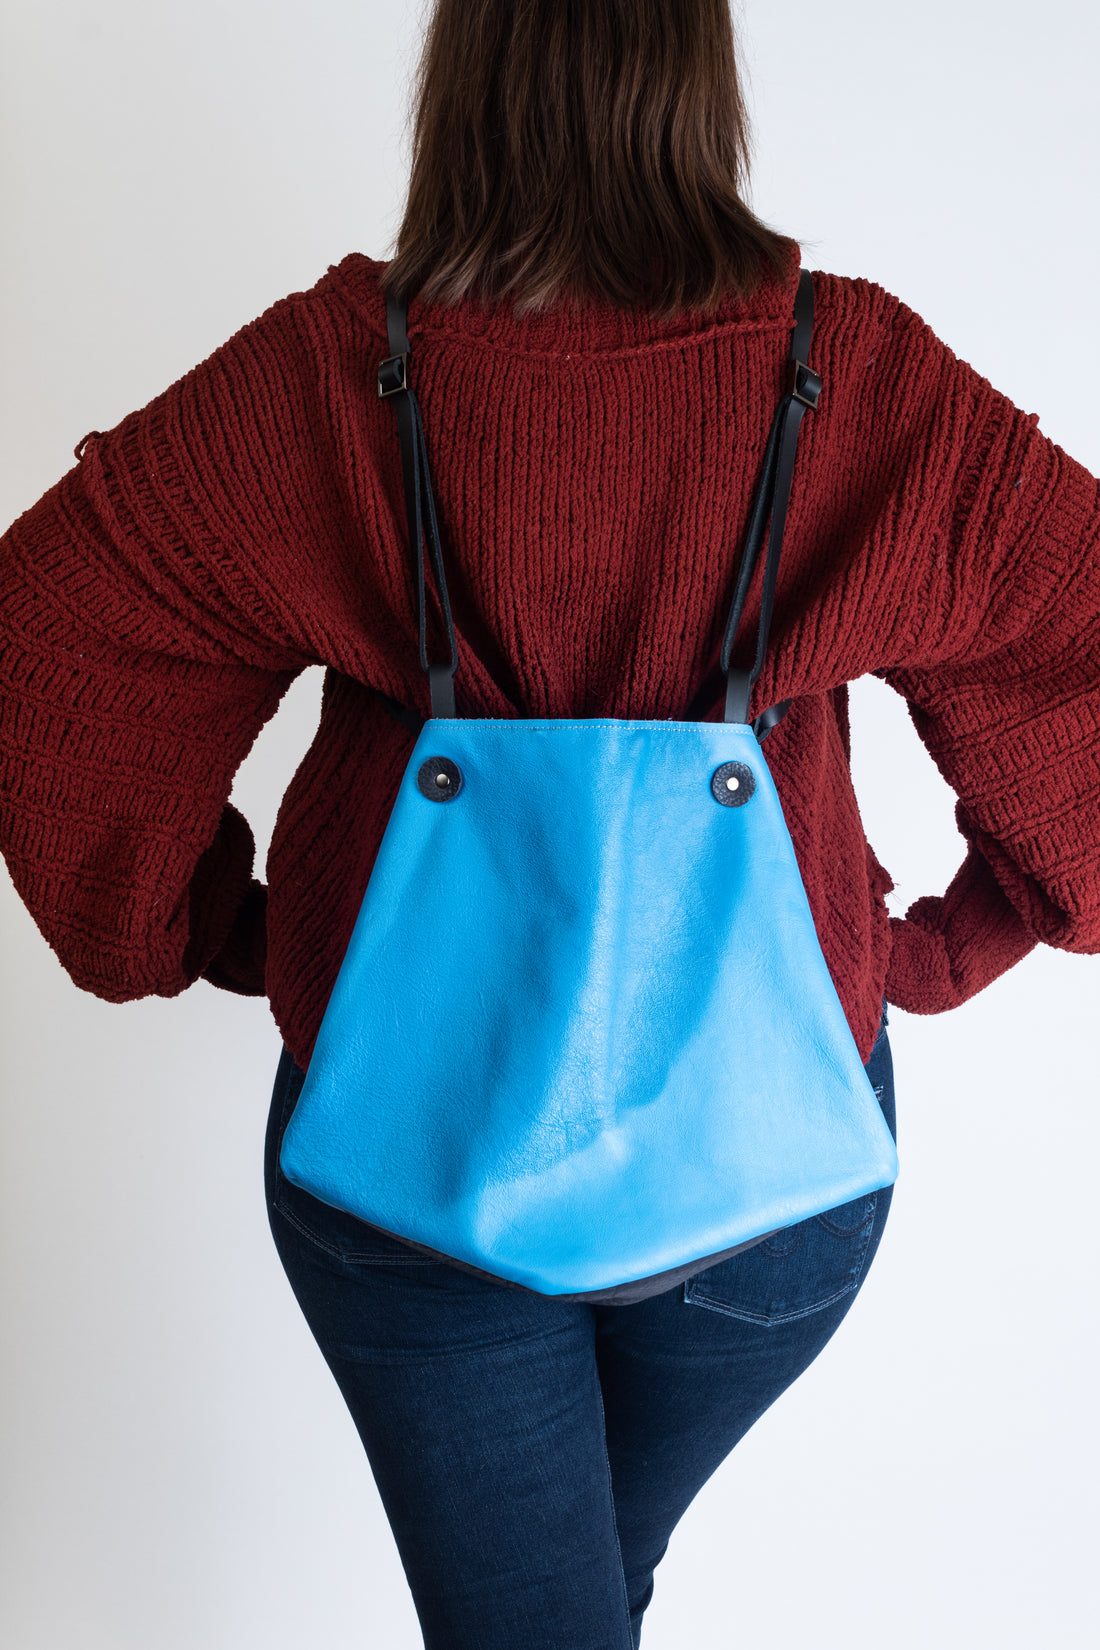 Diamond tote - Mineral Blue leather